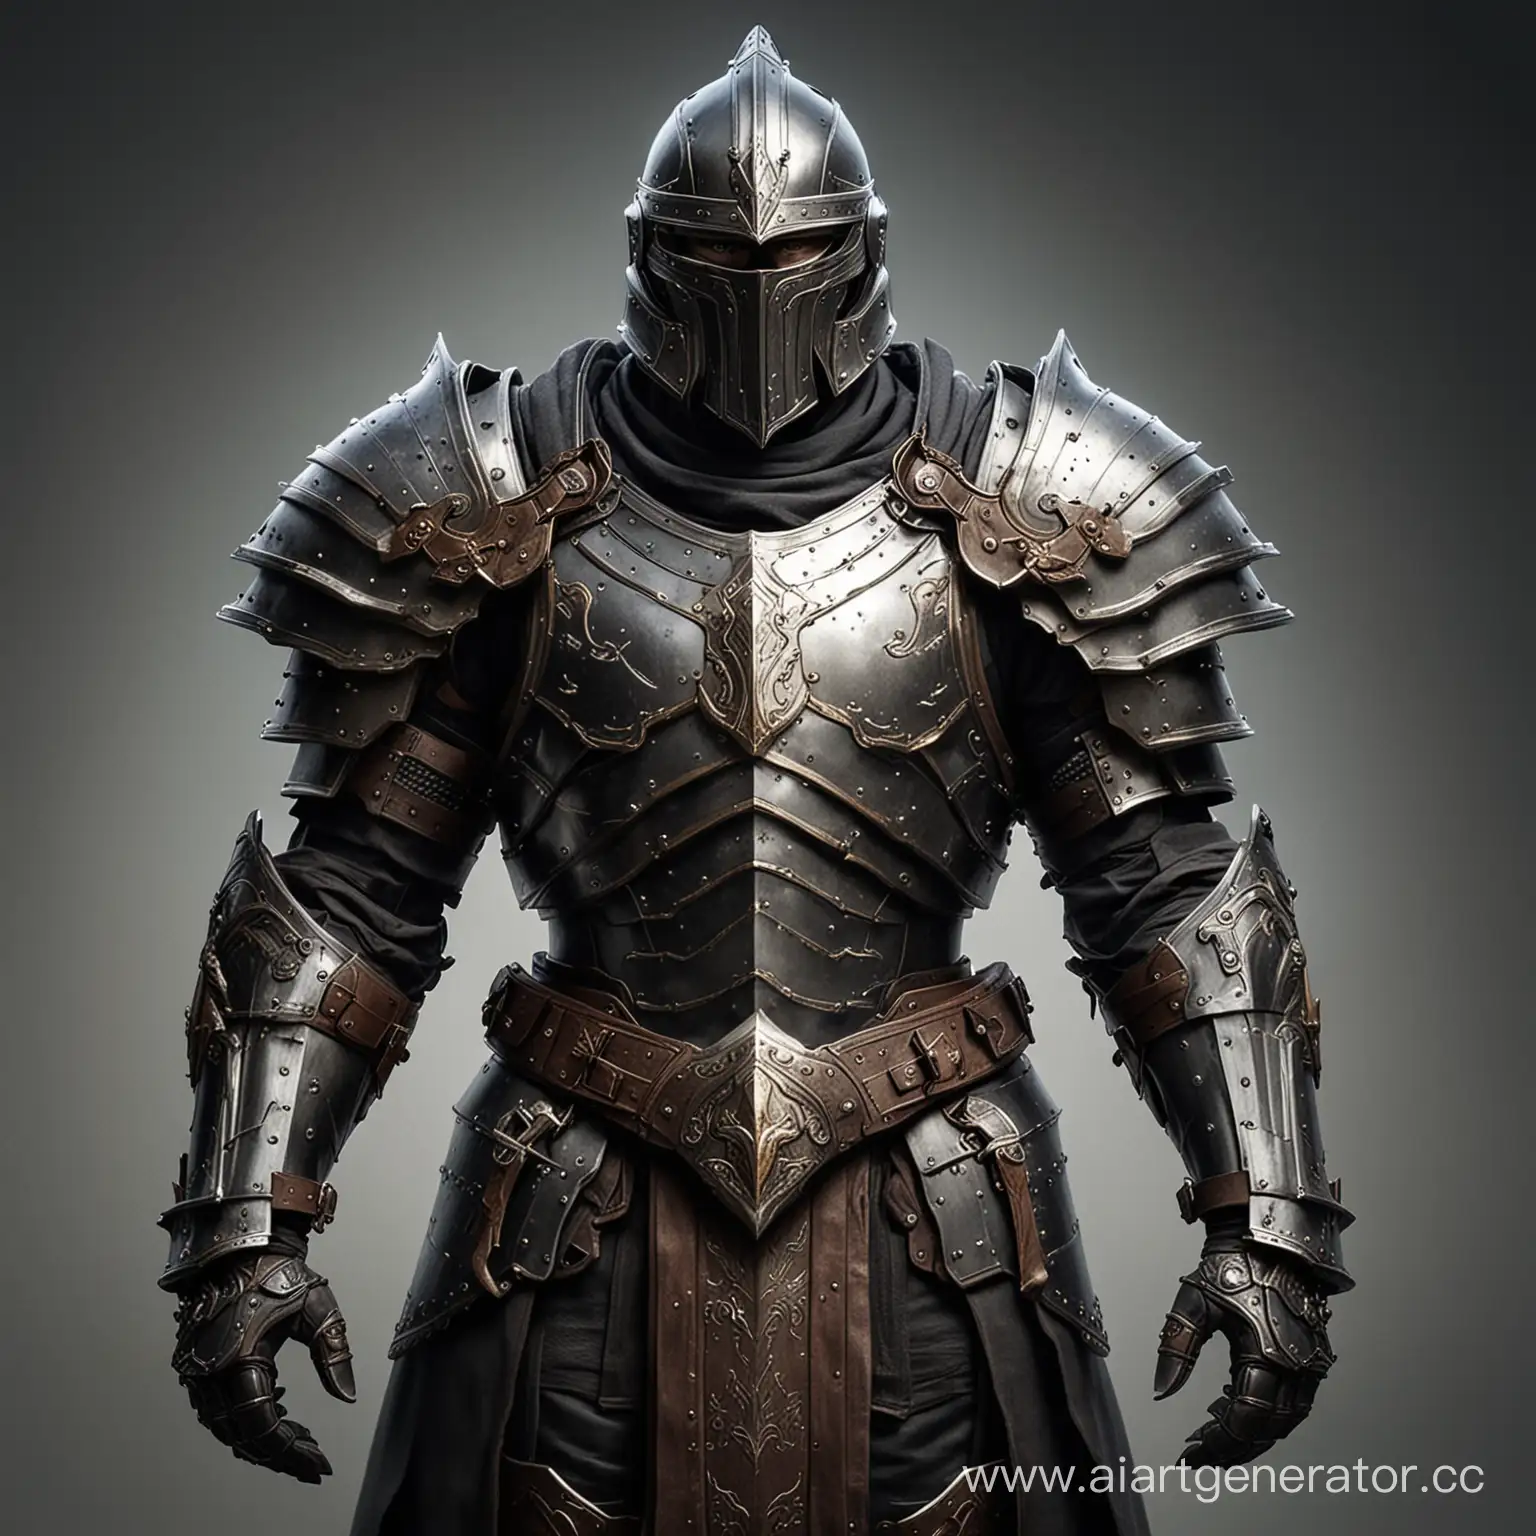 Tall-Paladin-in-Dark-Fantasy-Heavy-Plate-Armor-with-Closed-Helmet-and-Enormous-Shoulder-Pads